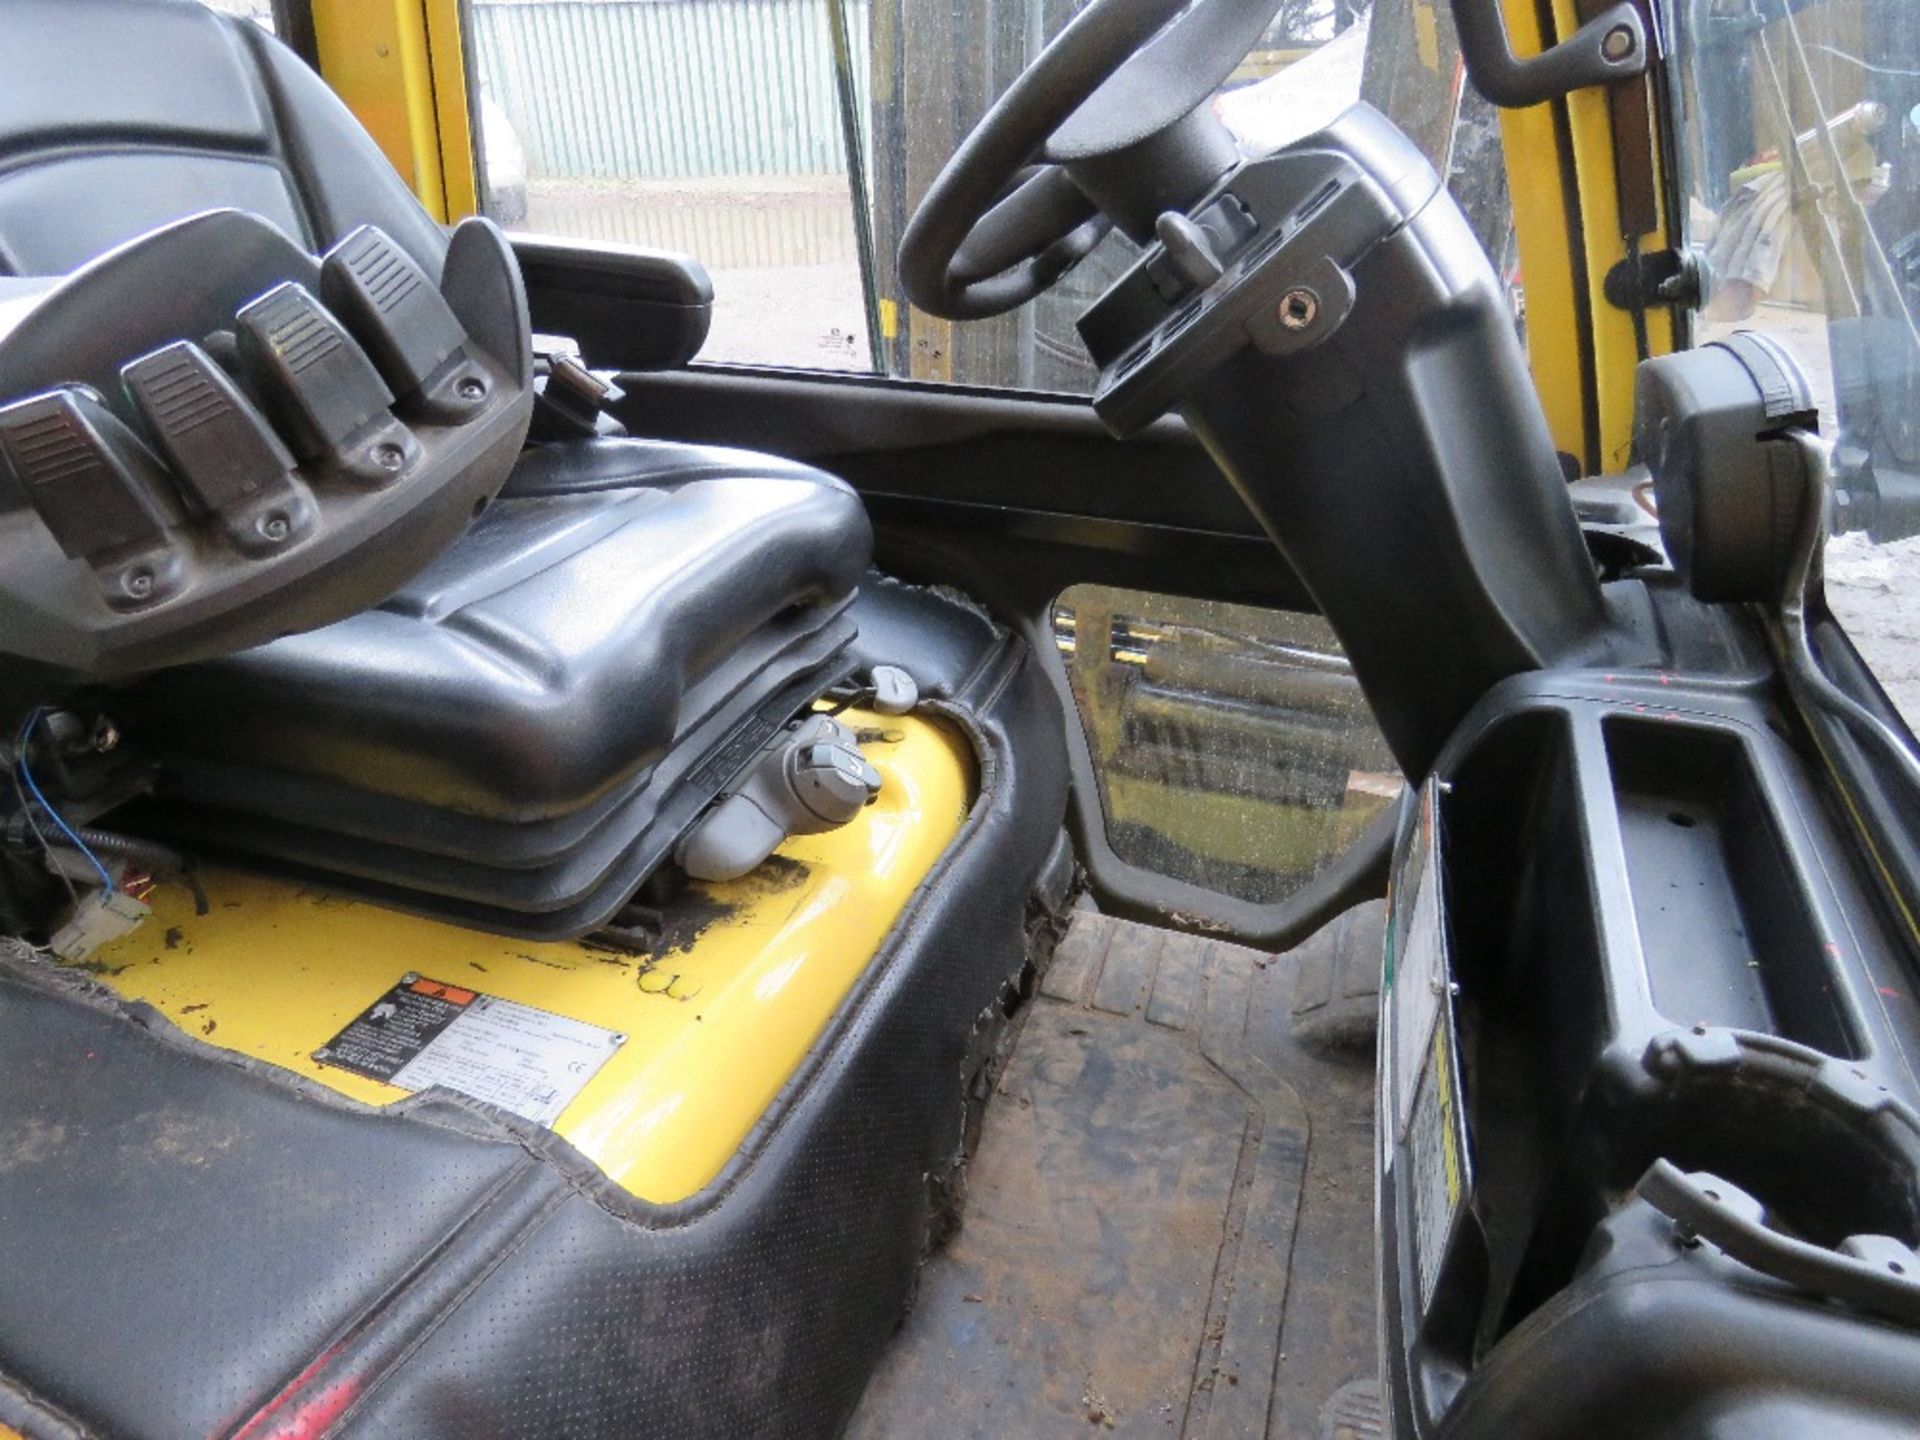 HYSTER 2 TONNE GAS FORKLIFT WITH CAB YEAR 2012 - Image 9 of 10